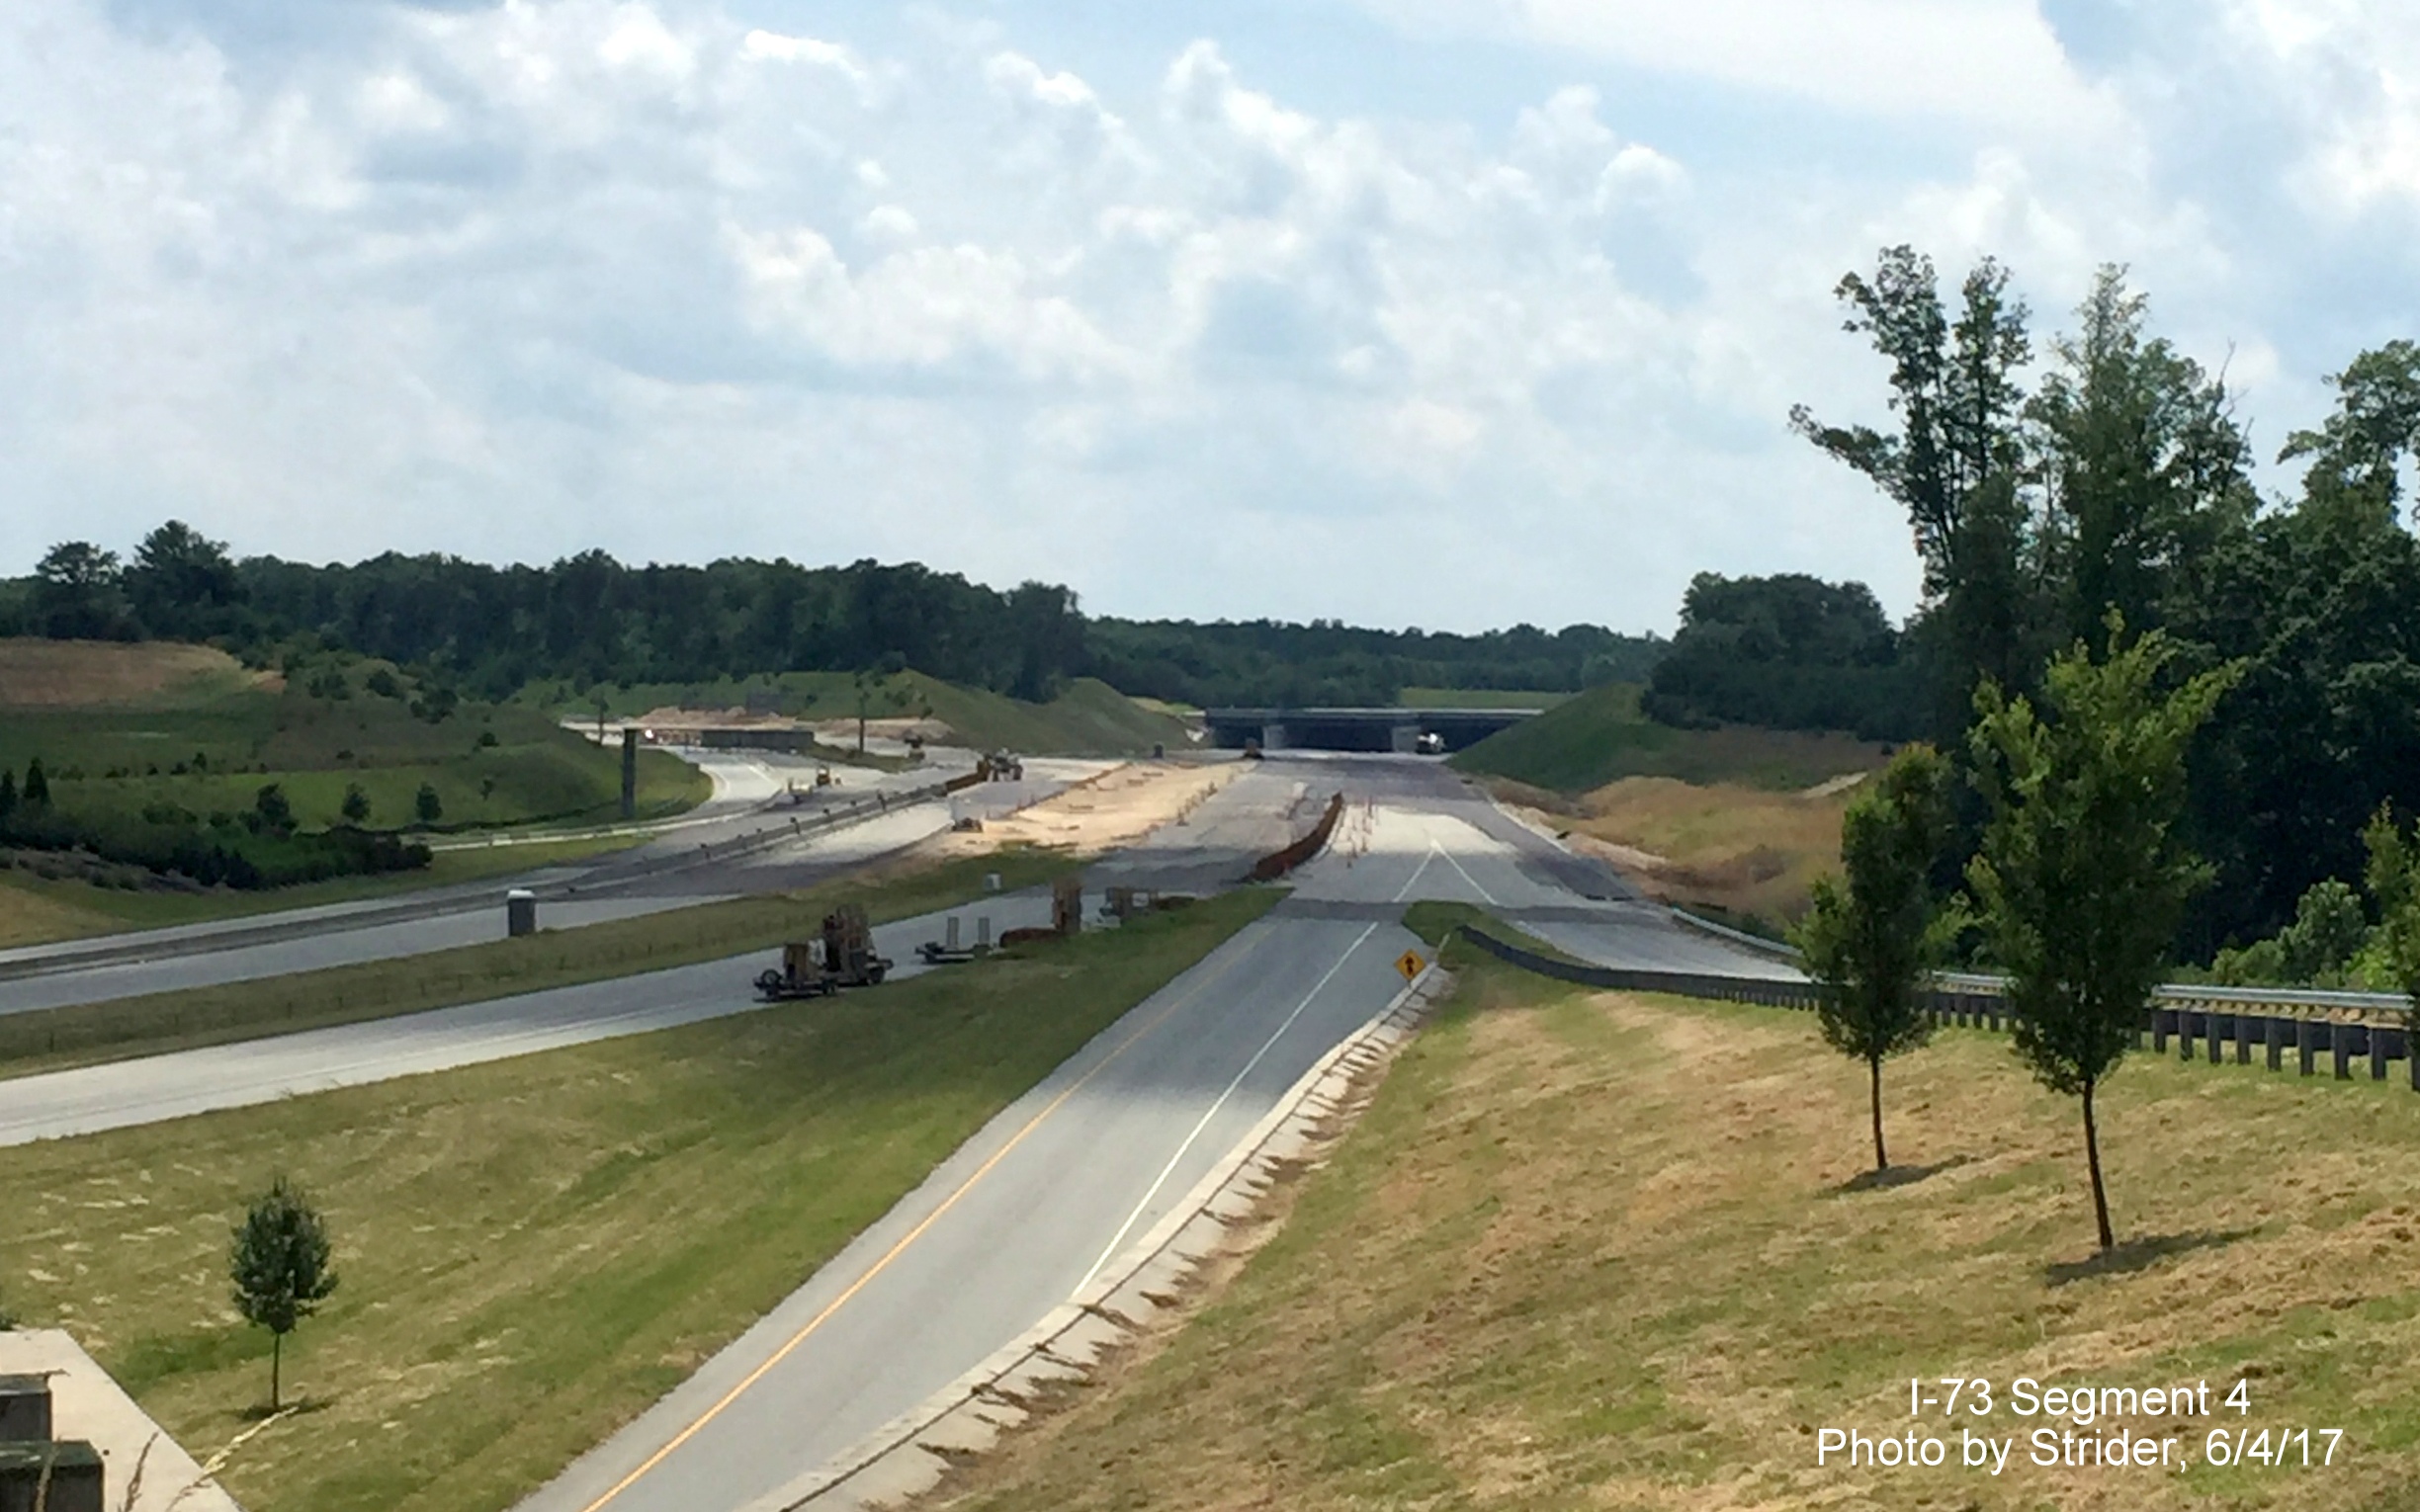 Image taken of construction along closed section of Bryan Blvd in Greensboro showing progress in constructing Future I-73 Connector to NC 68, from Strider